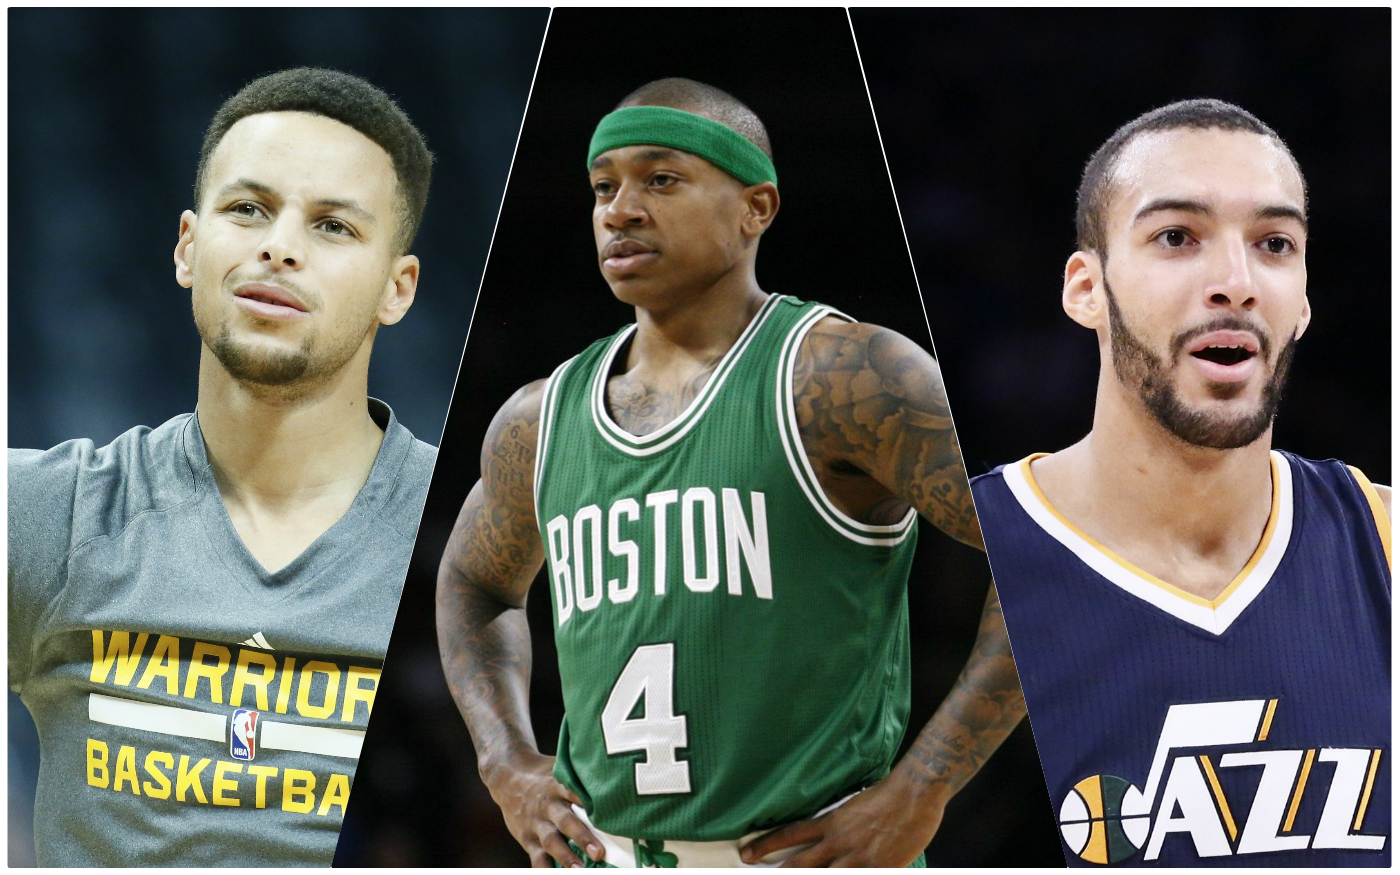 CQFR : Isaiah King in the Fourth, Steph est un insolent